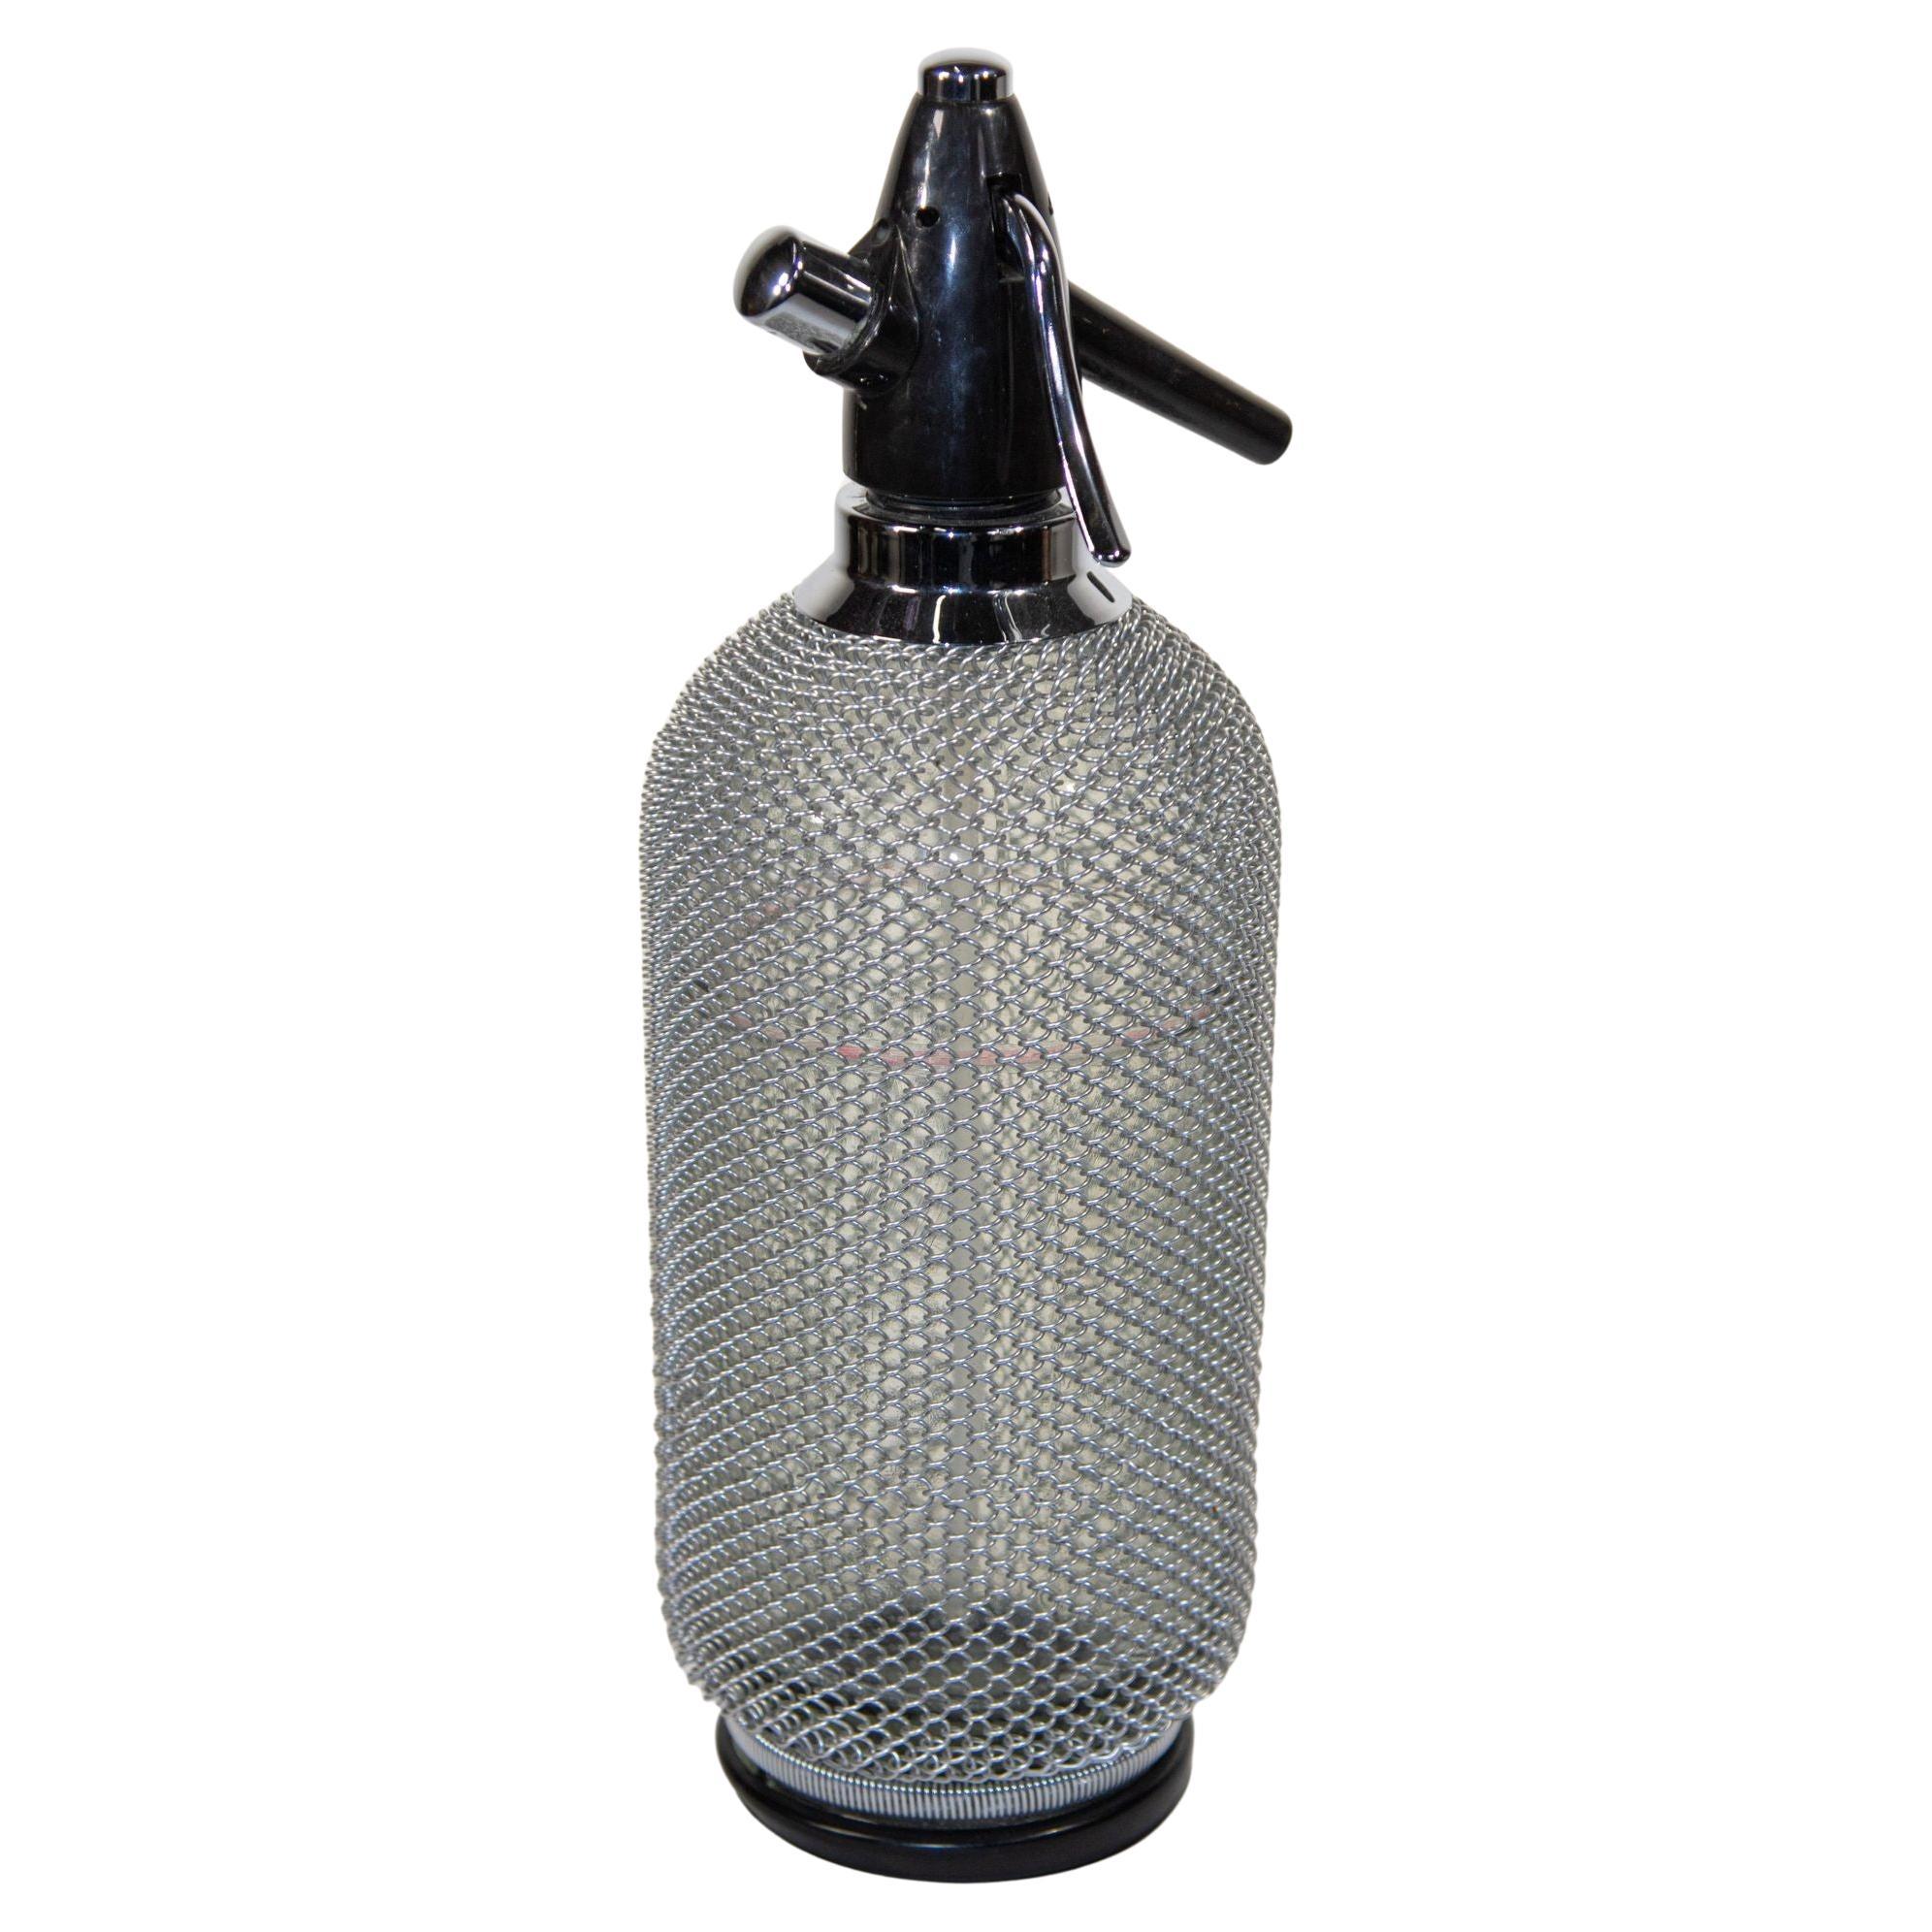 Vintage Classic Soda Siphon Seltzer Glass Bottle with Wire Mesh For Sale